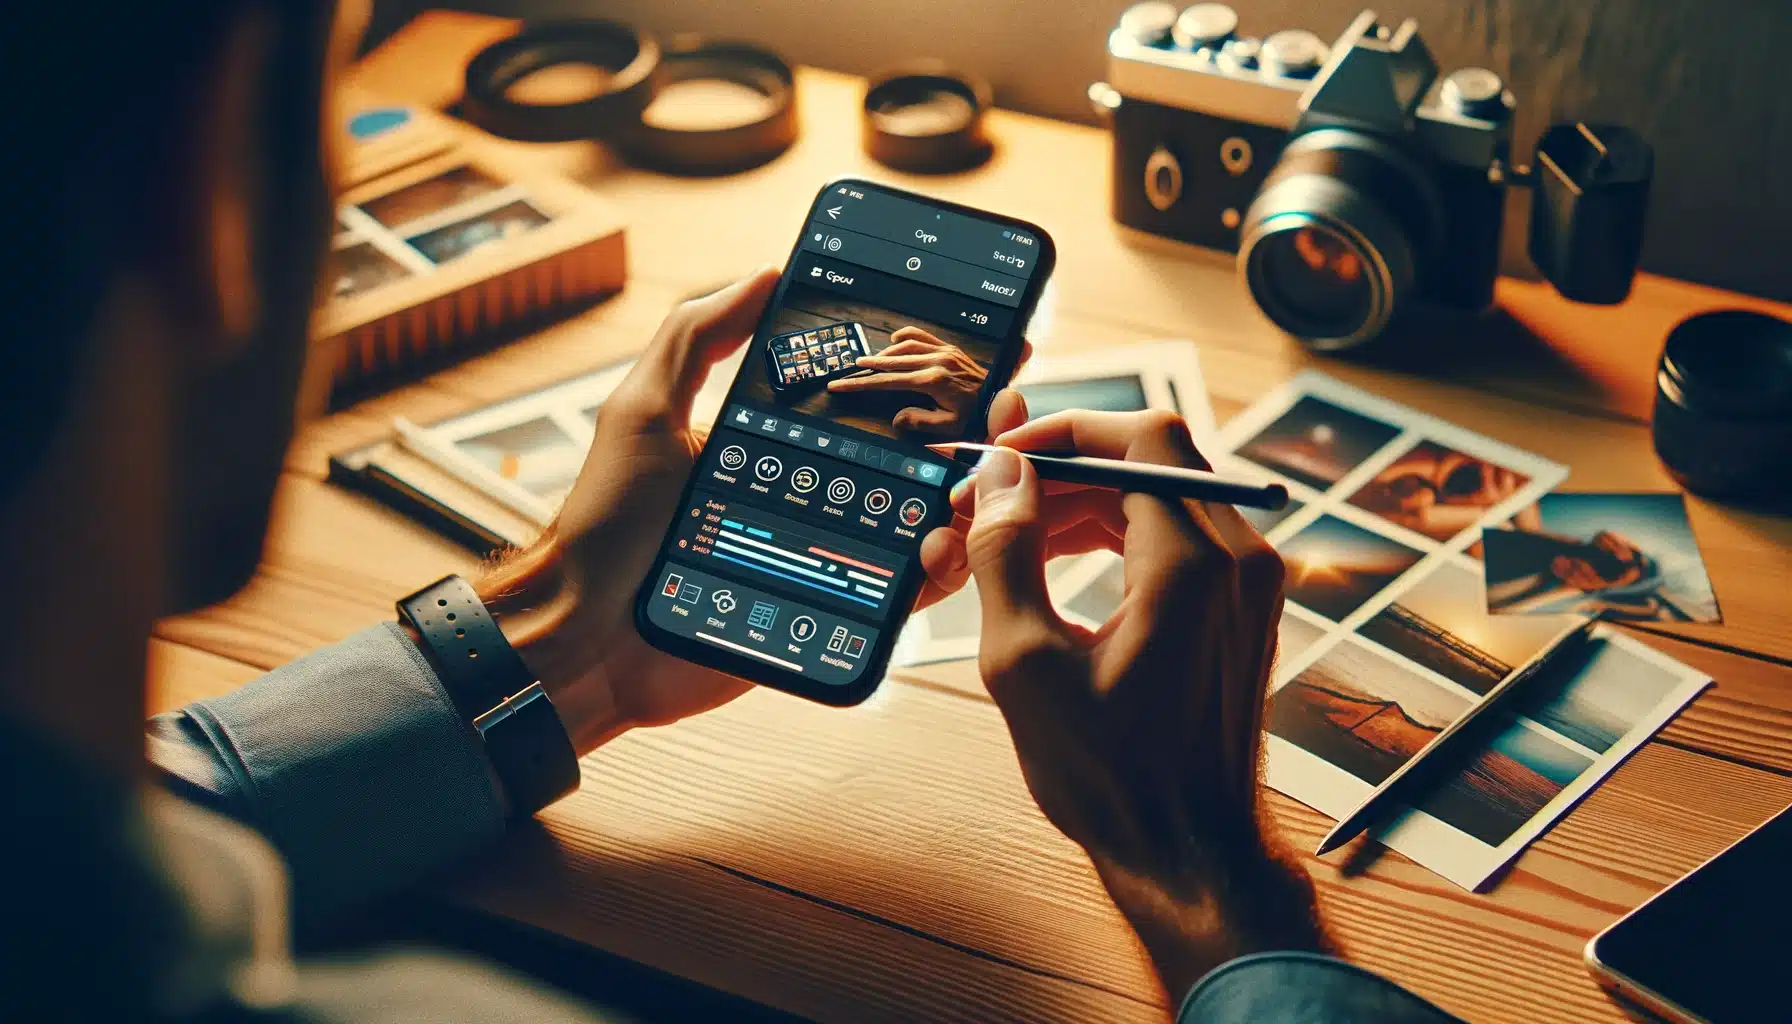 Person at a desk using a smartphone with a photo editing app, surrounded by photography equipment, illustrating the use of mobile apps for photo editing.